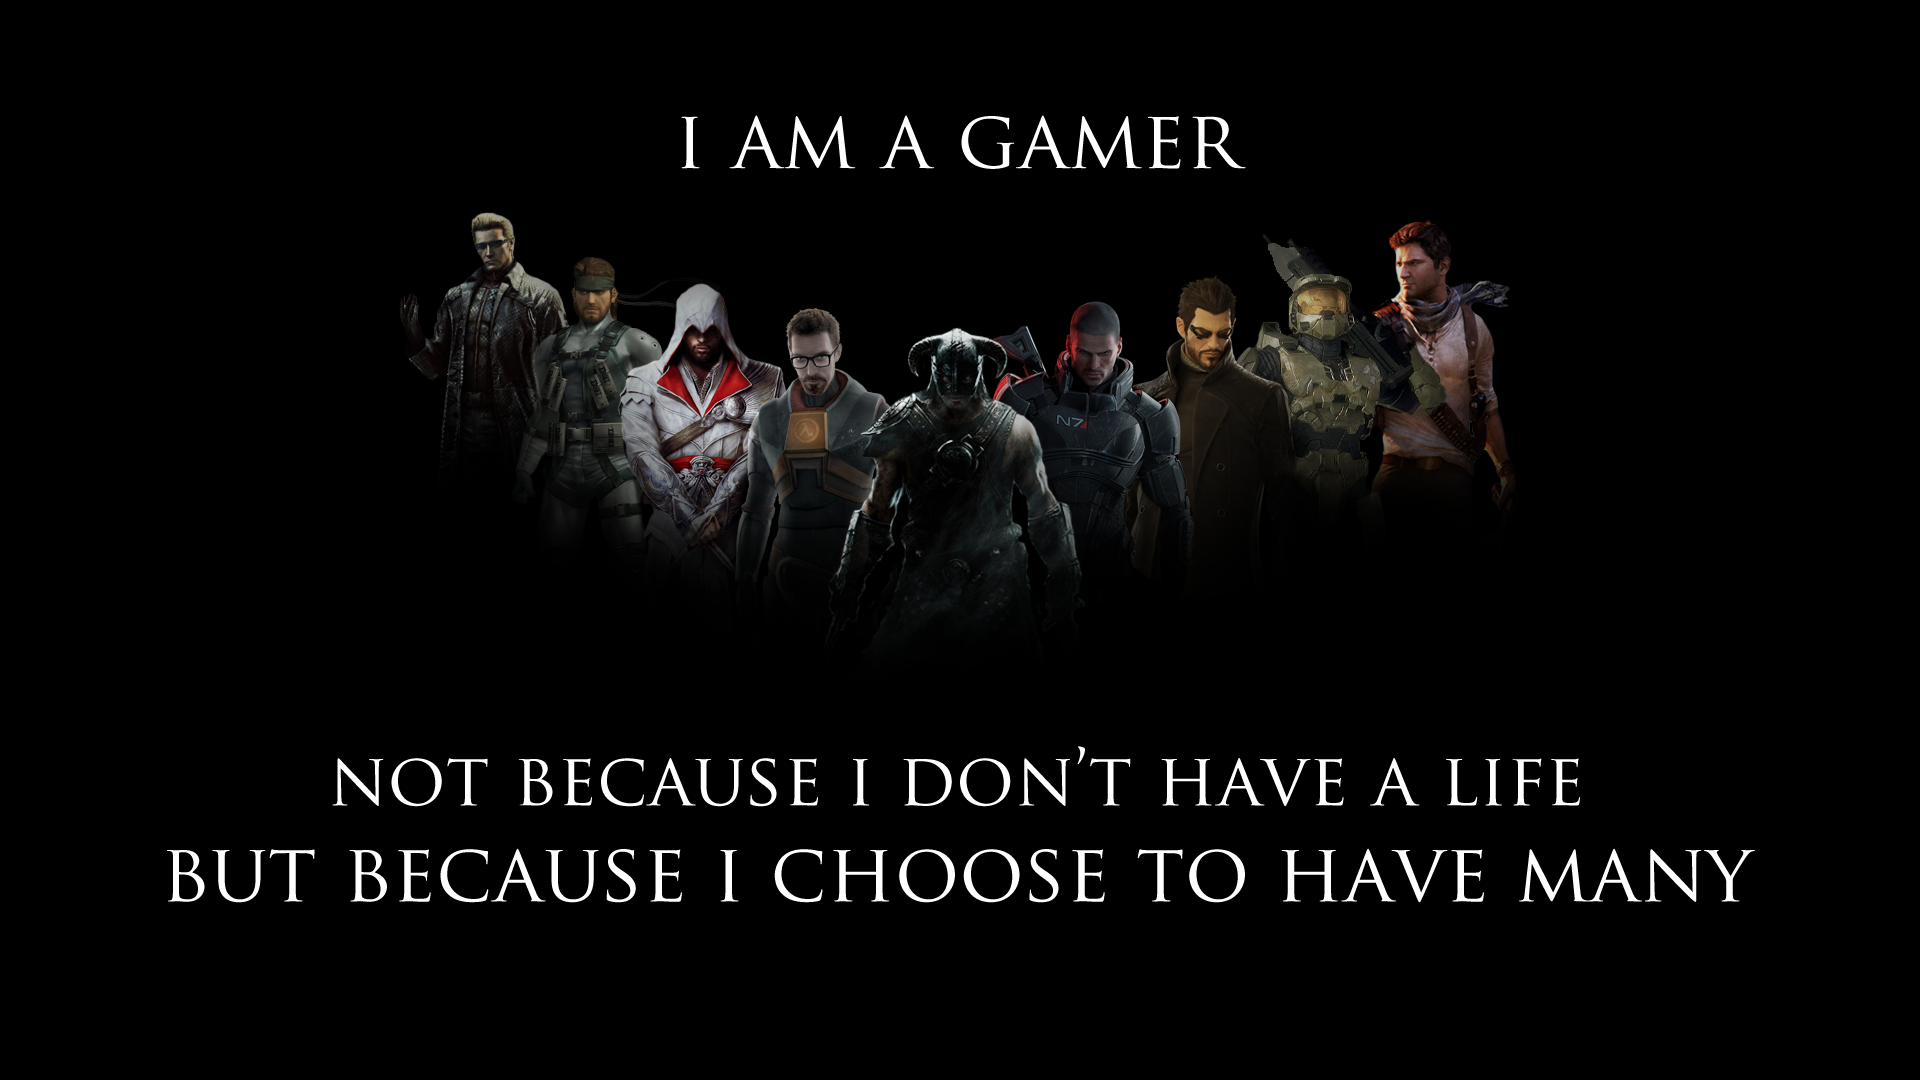 I am a gamer. Not because I don't have a life, but because I choose to have many. Check out this wallpaper I made!